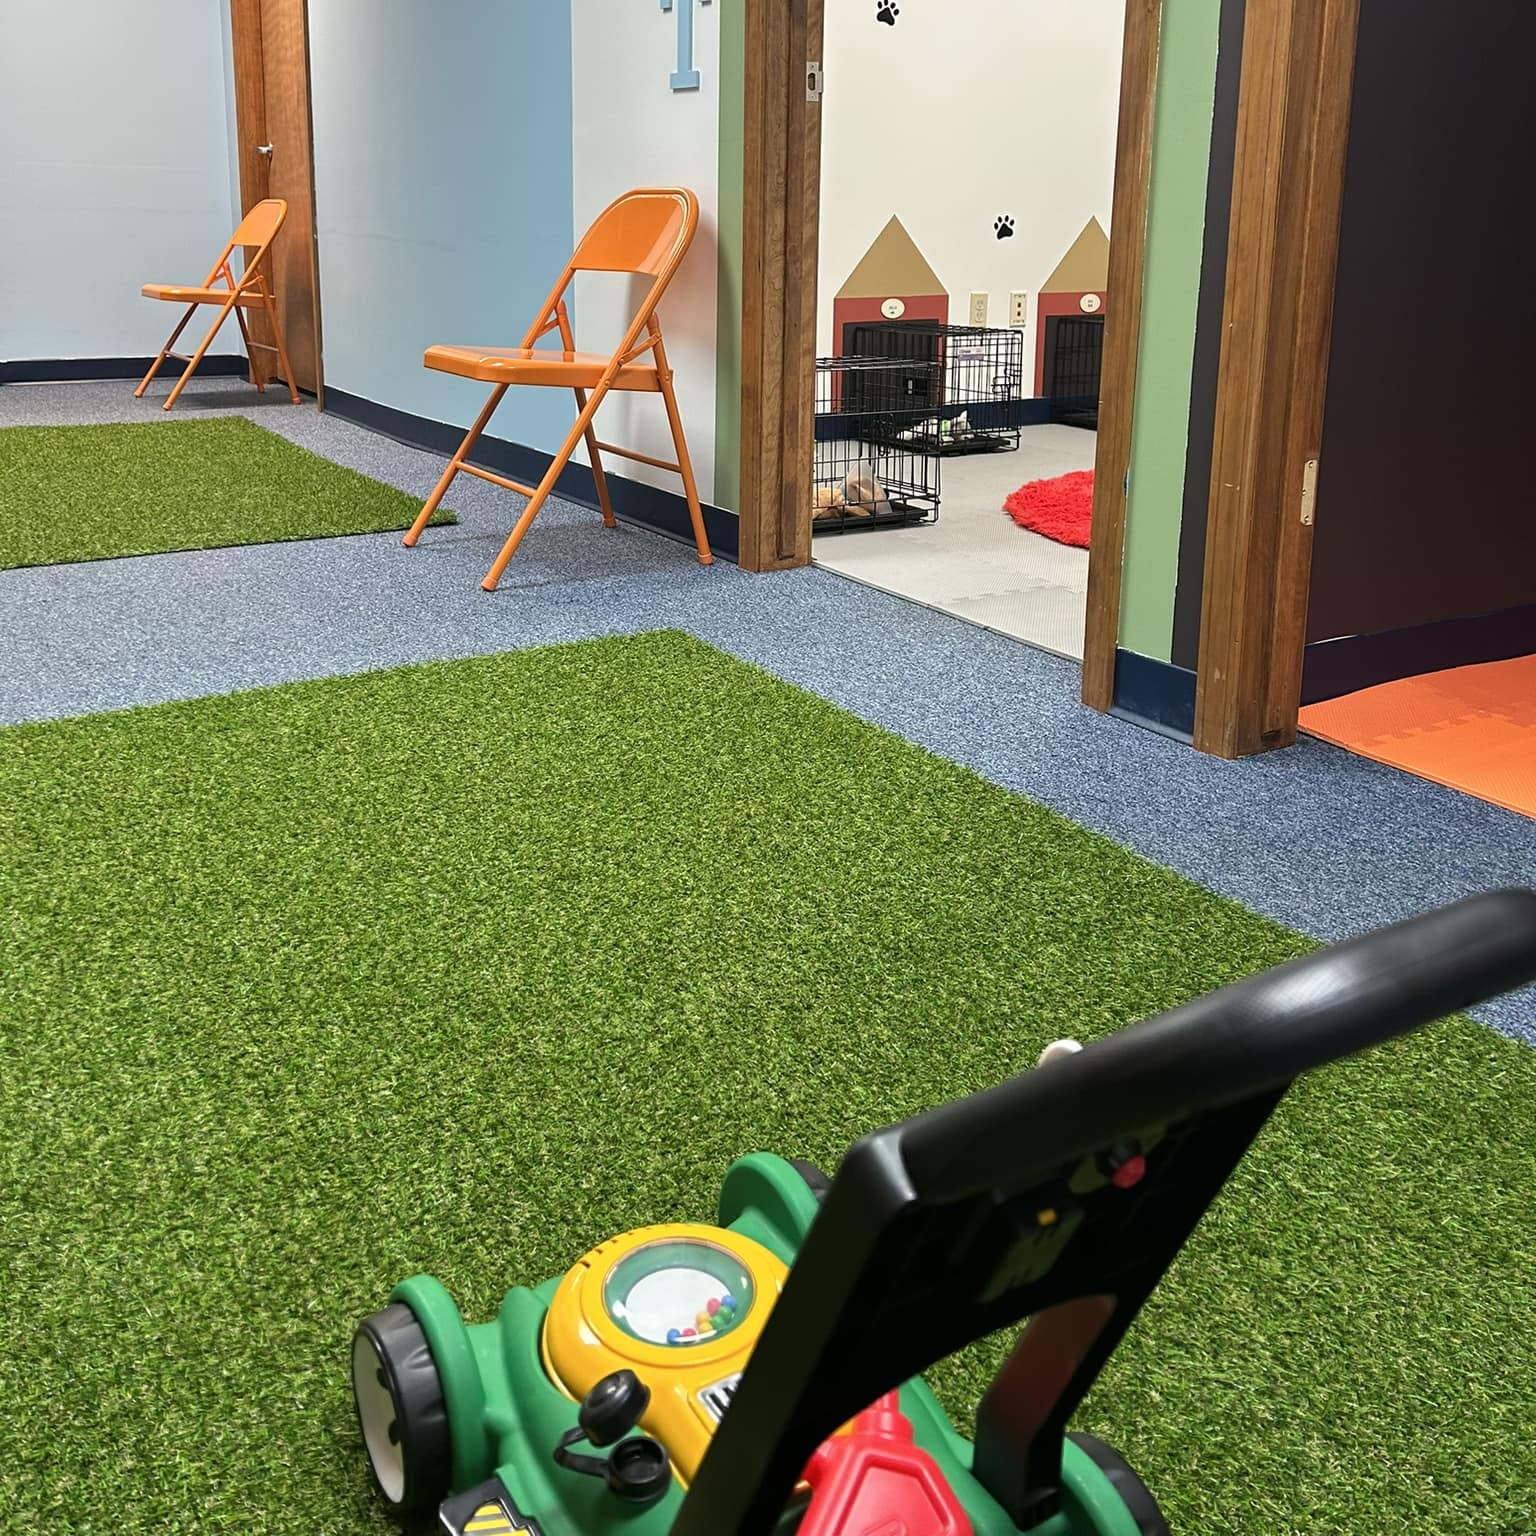 Mini City play area and lawn mower.